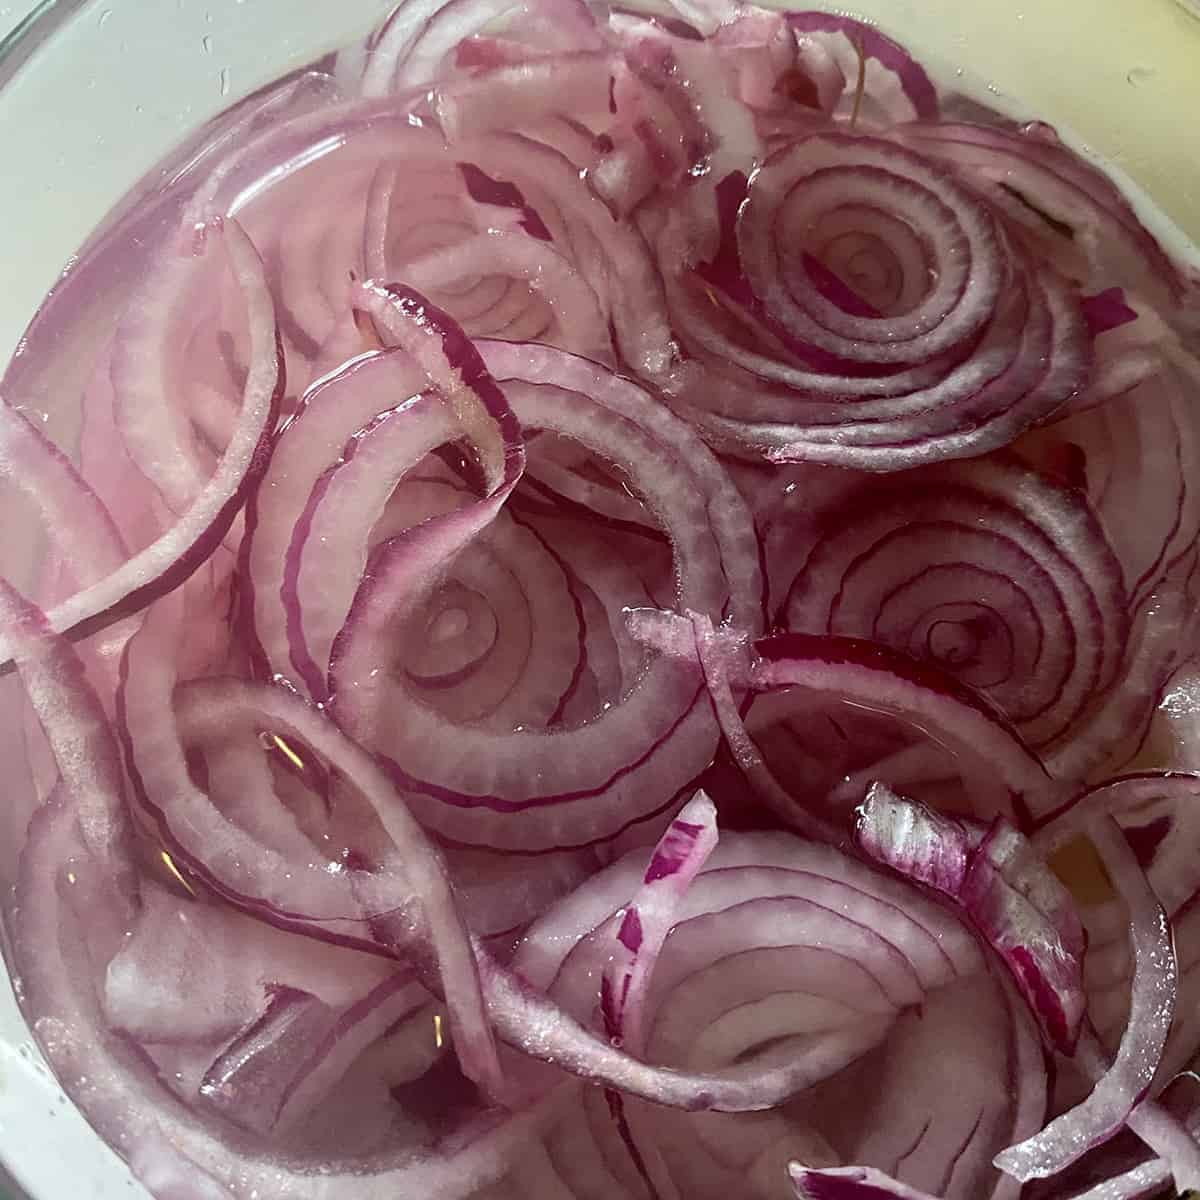 Red Onions soaking in salted water.